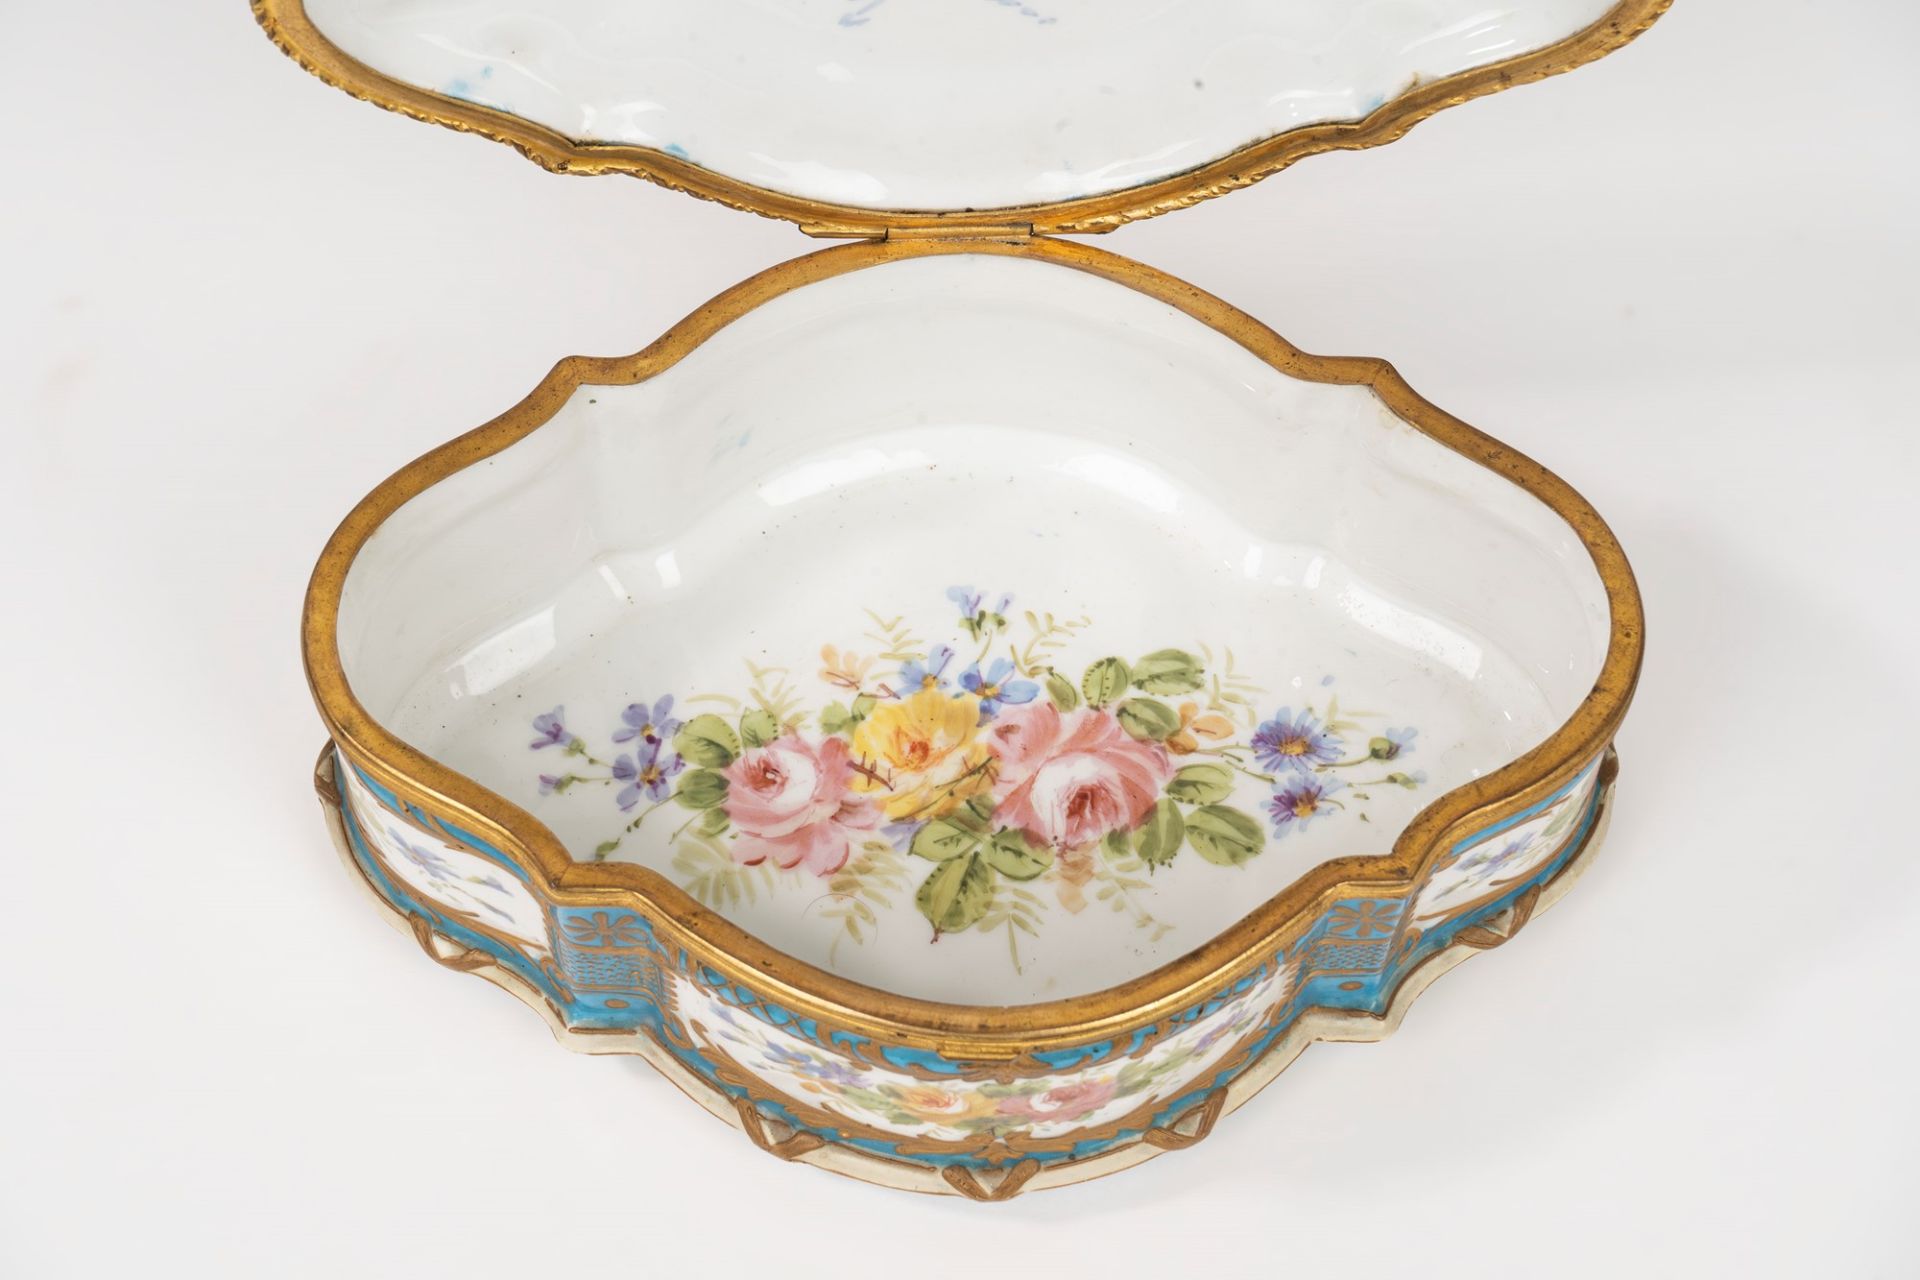 Polychrome porcelain box with gilded bronze finishes, Sevres manufacture, late 19th century - Image 3 of 4